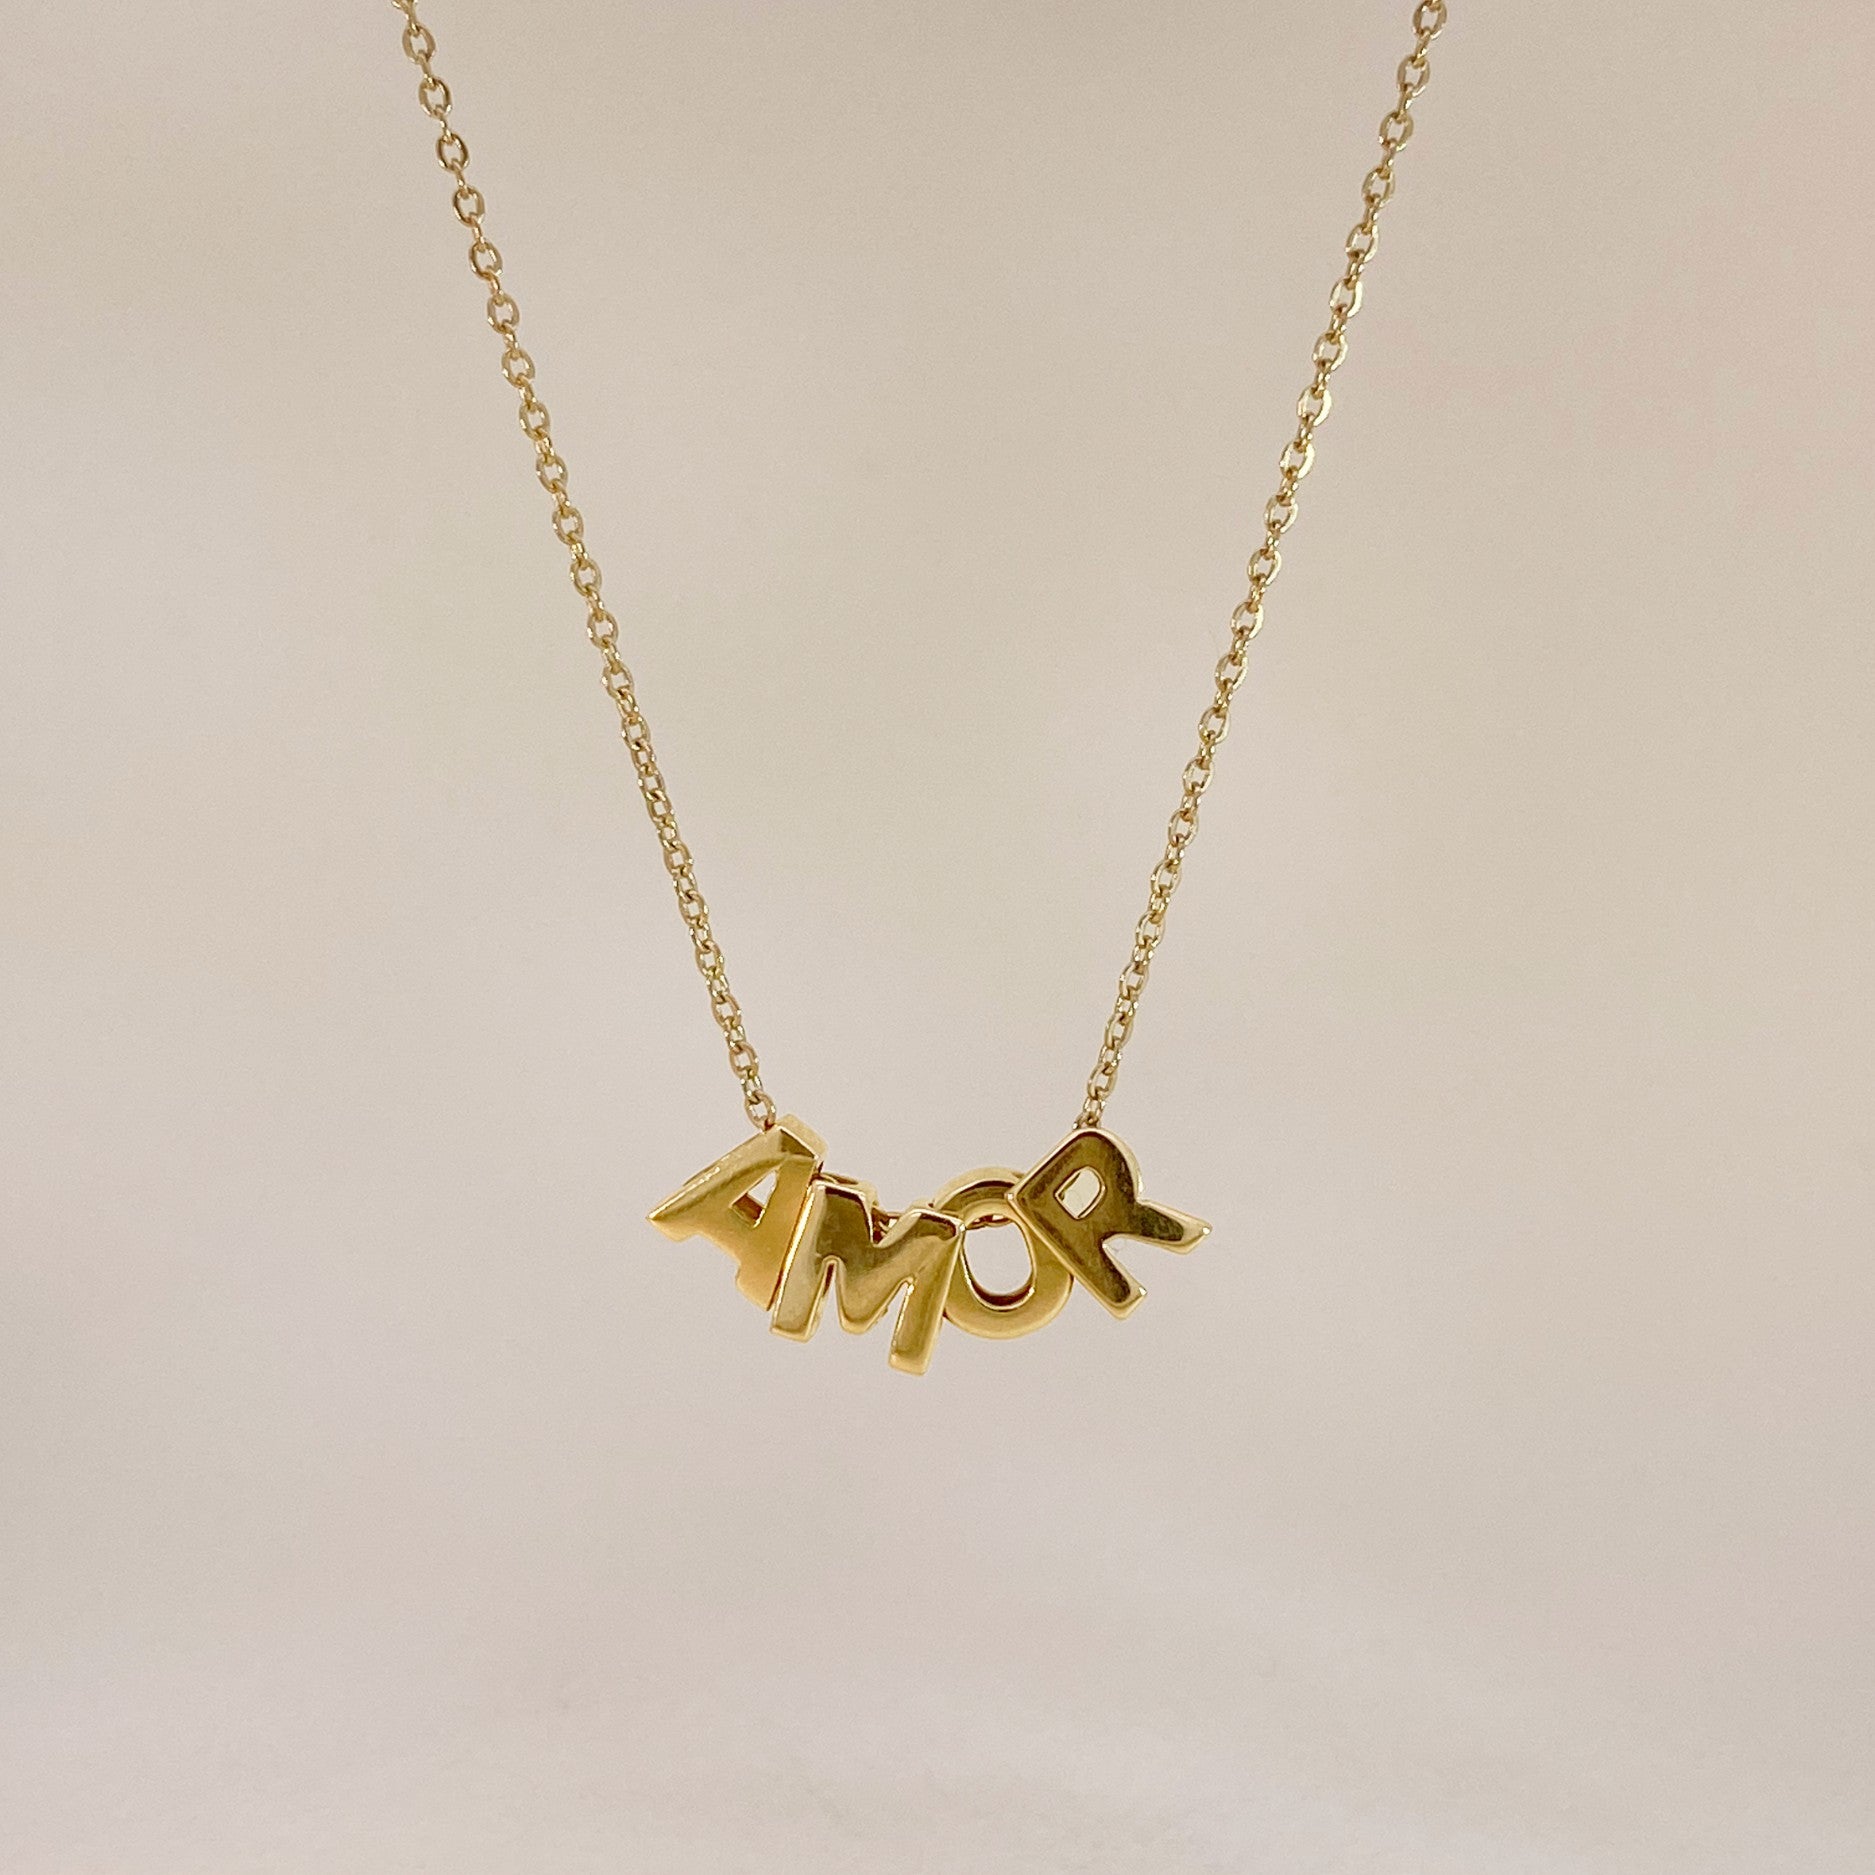 Amor necklace